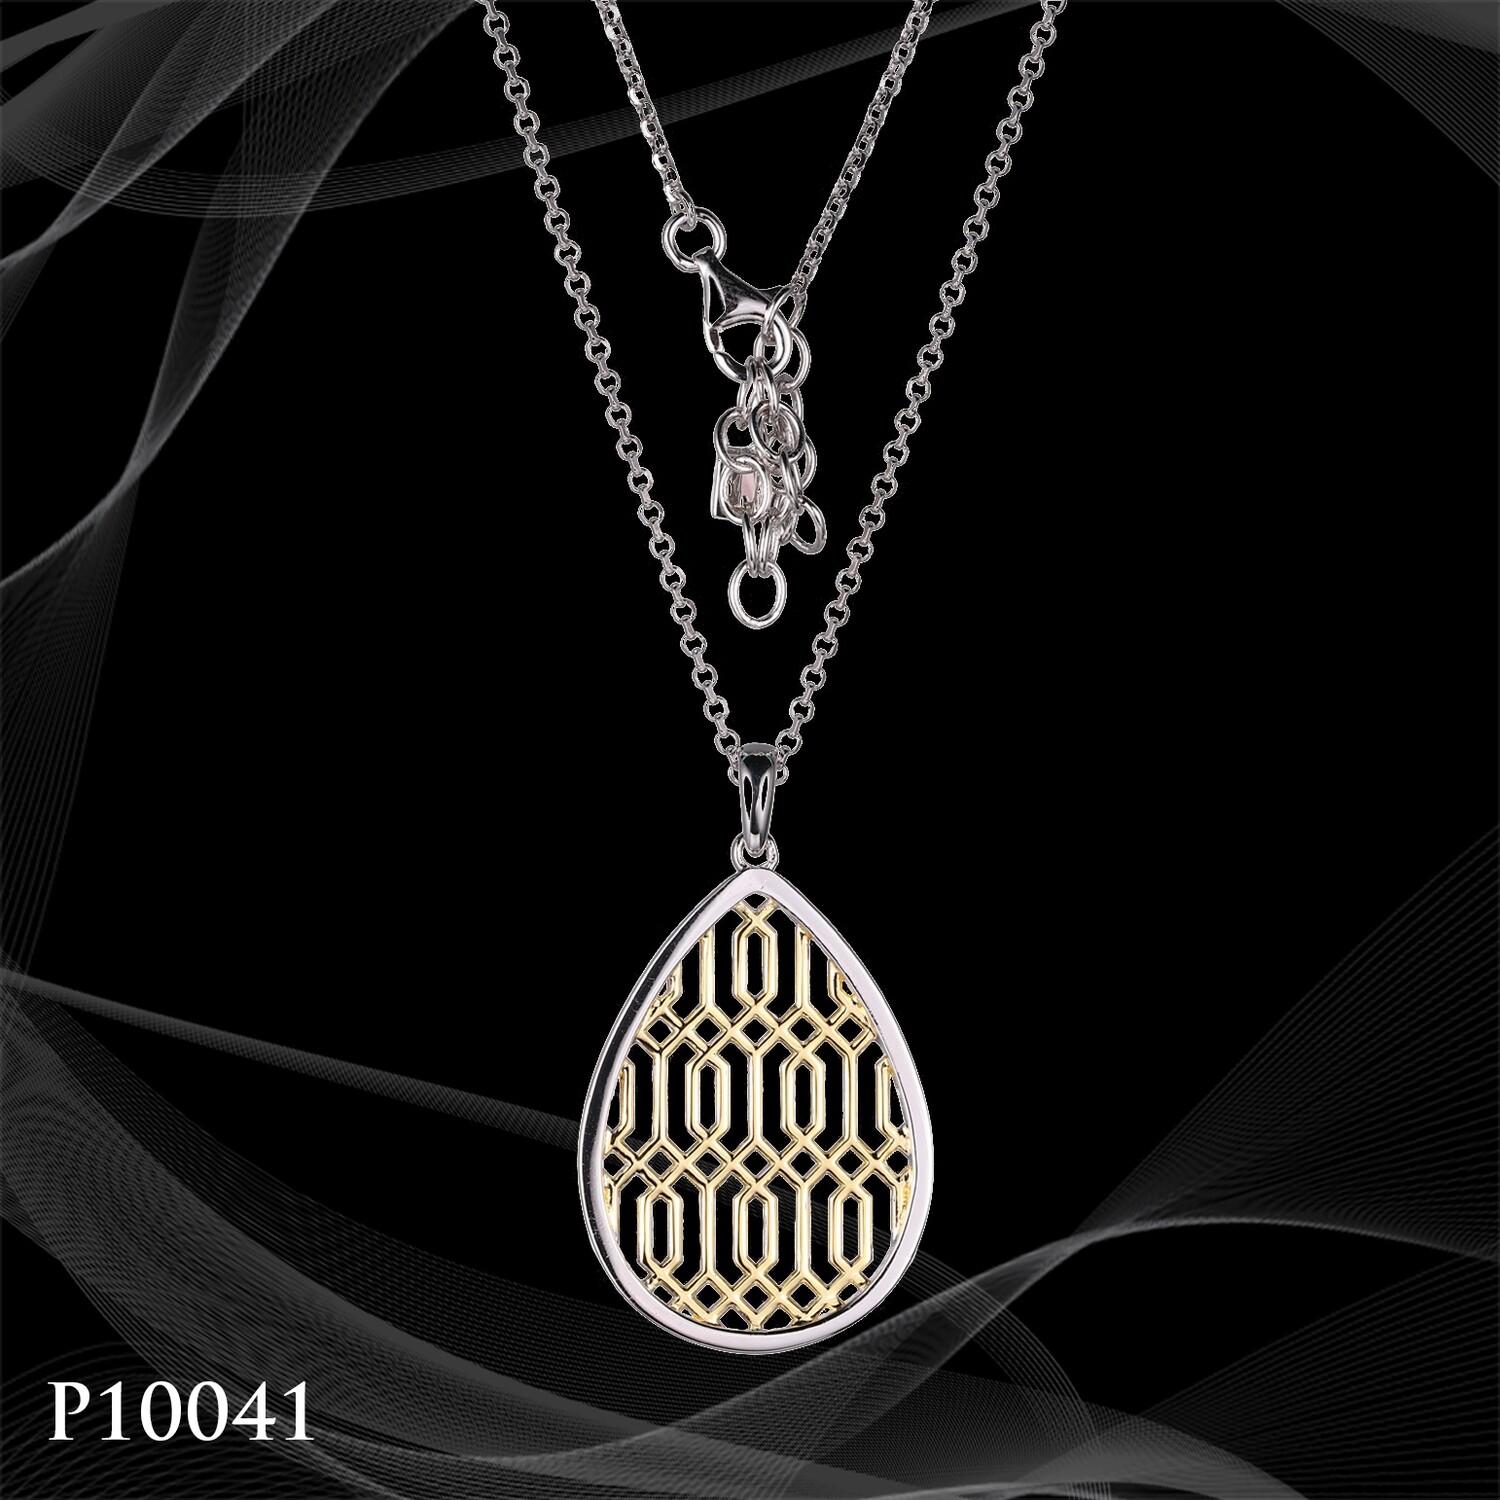 P10041 TWO-TONE STERLING SILVER PEAR SHAPED PENDANT